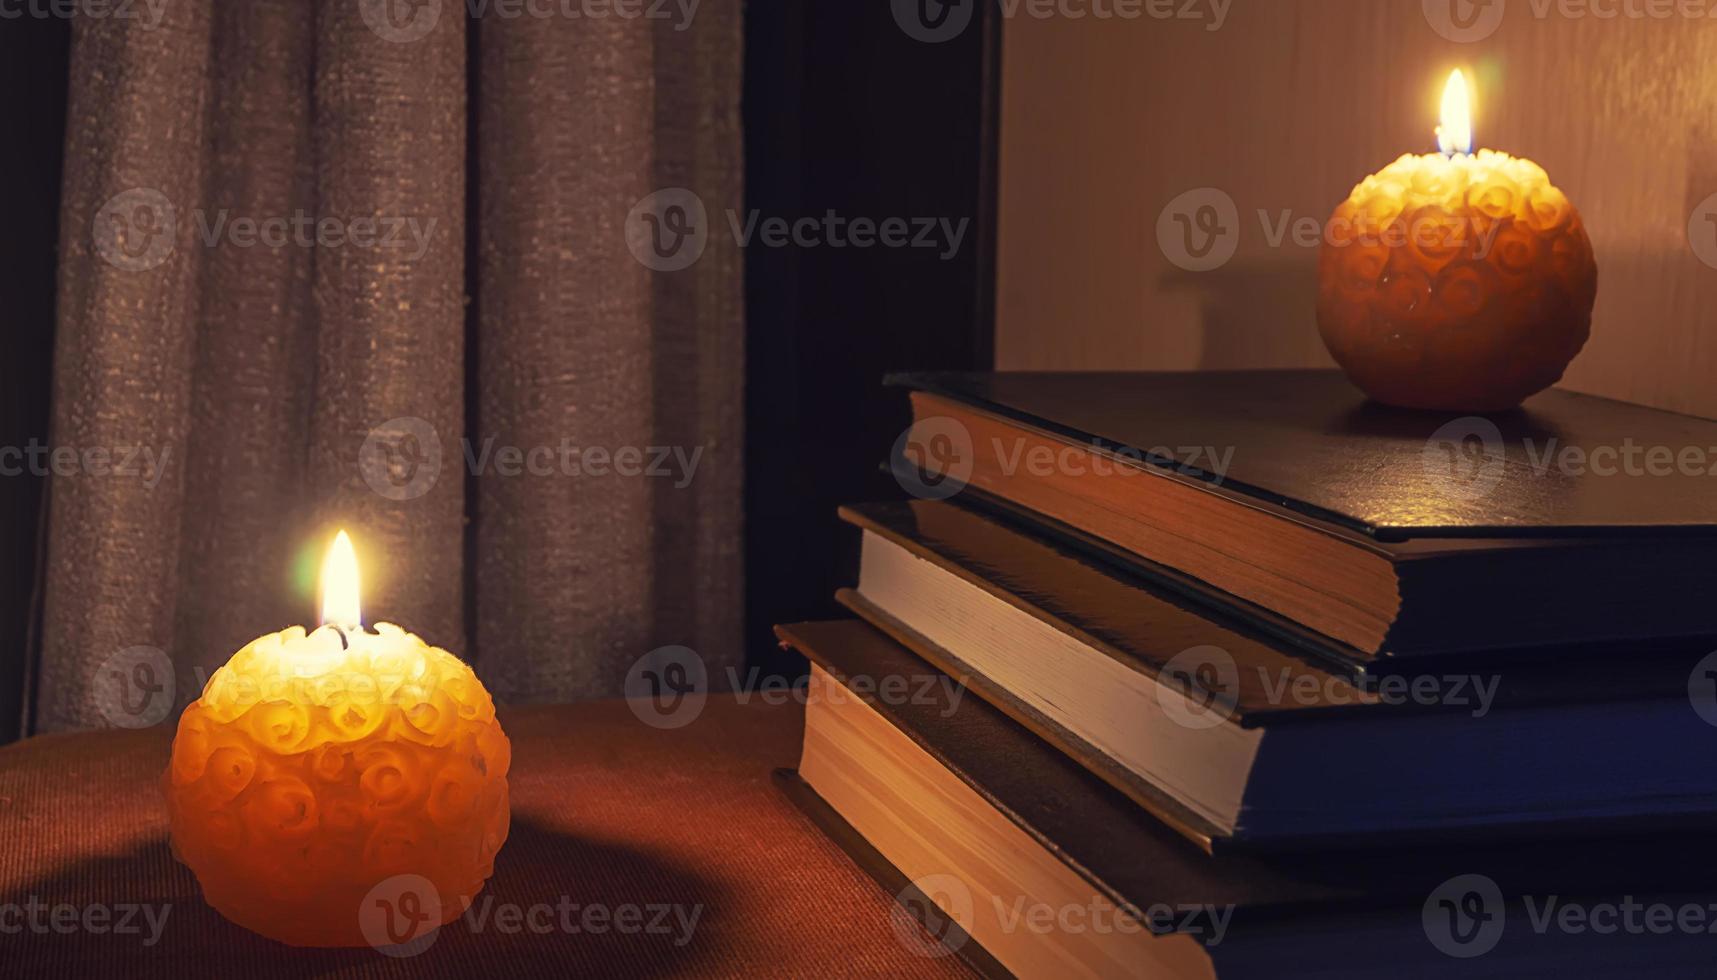 books on the table lit with night lights and candles photo